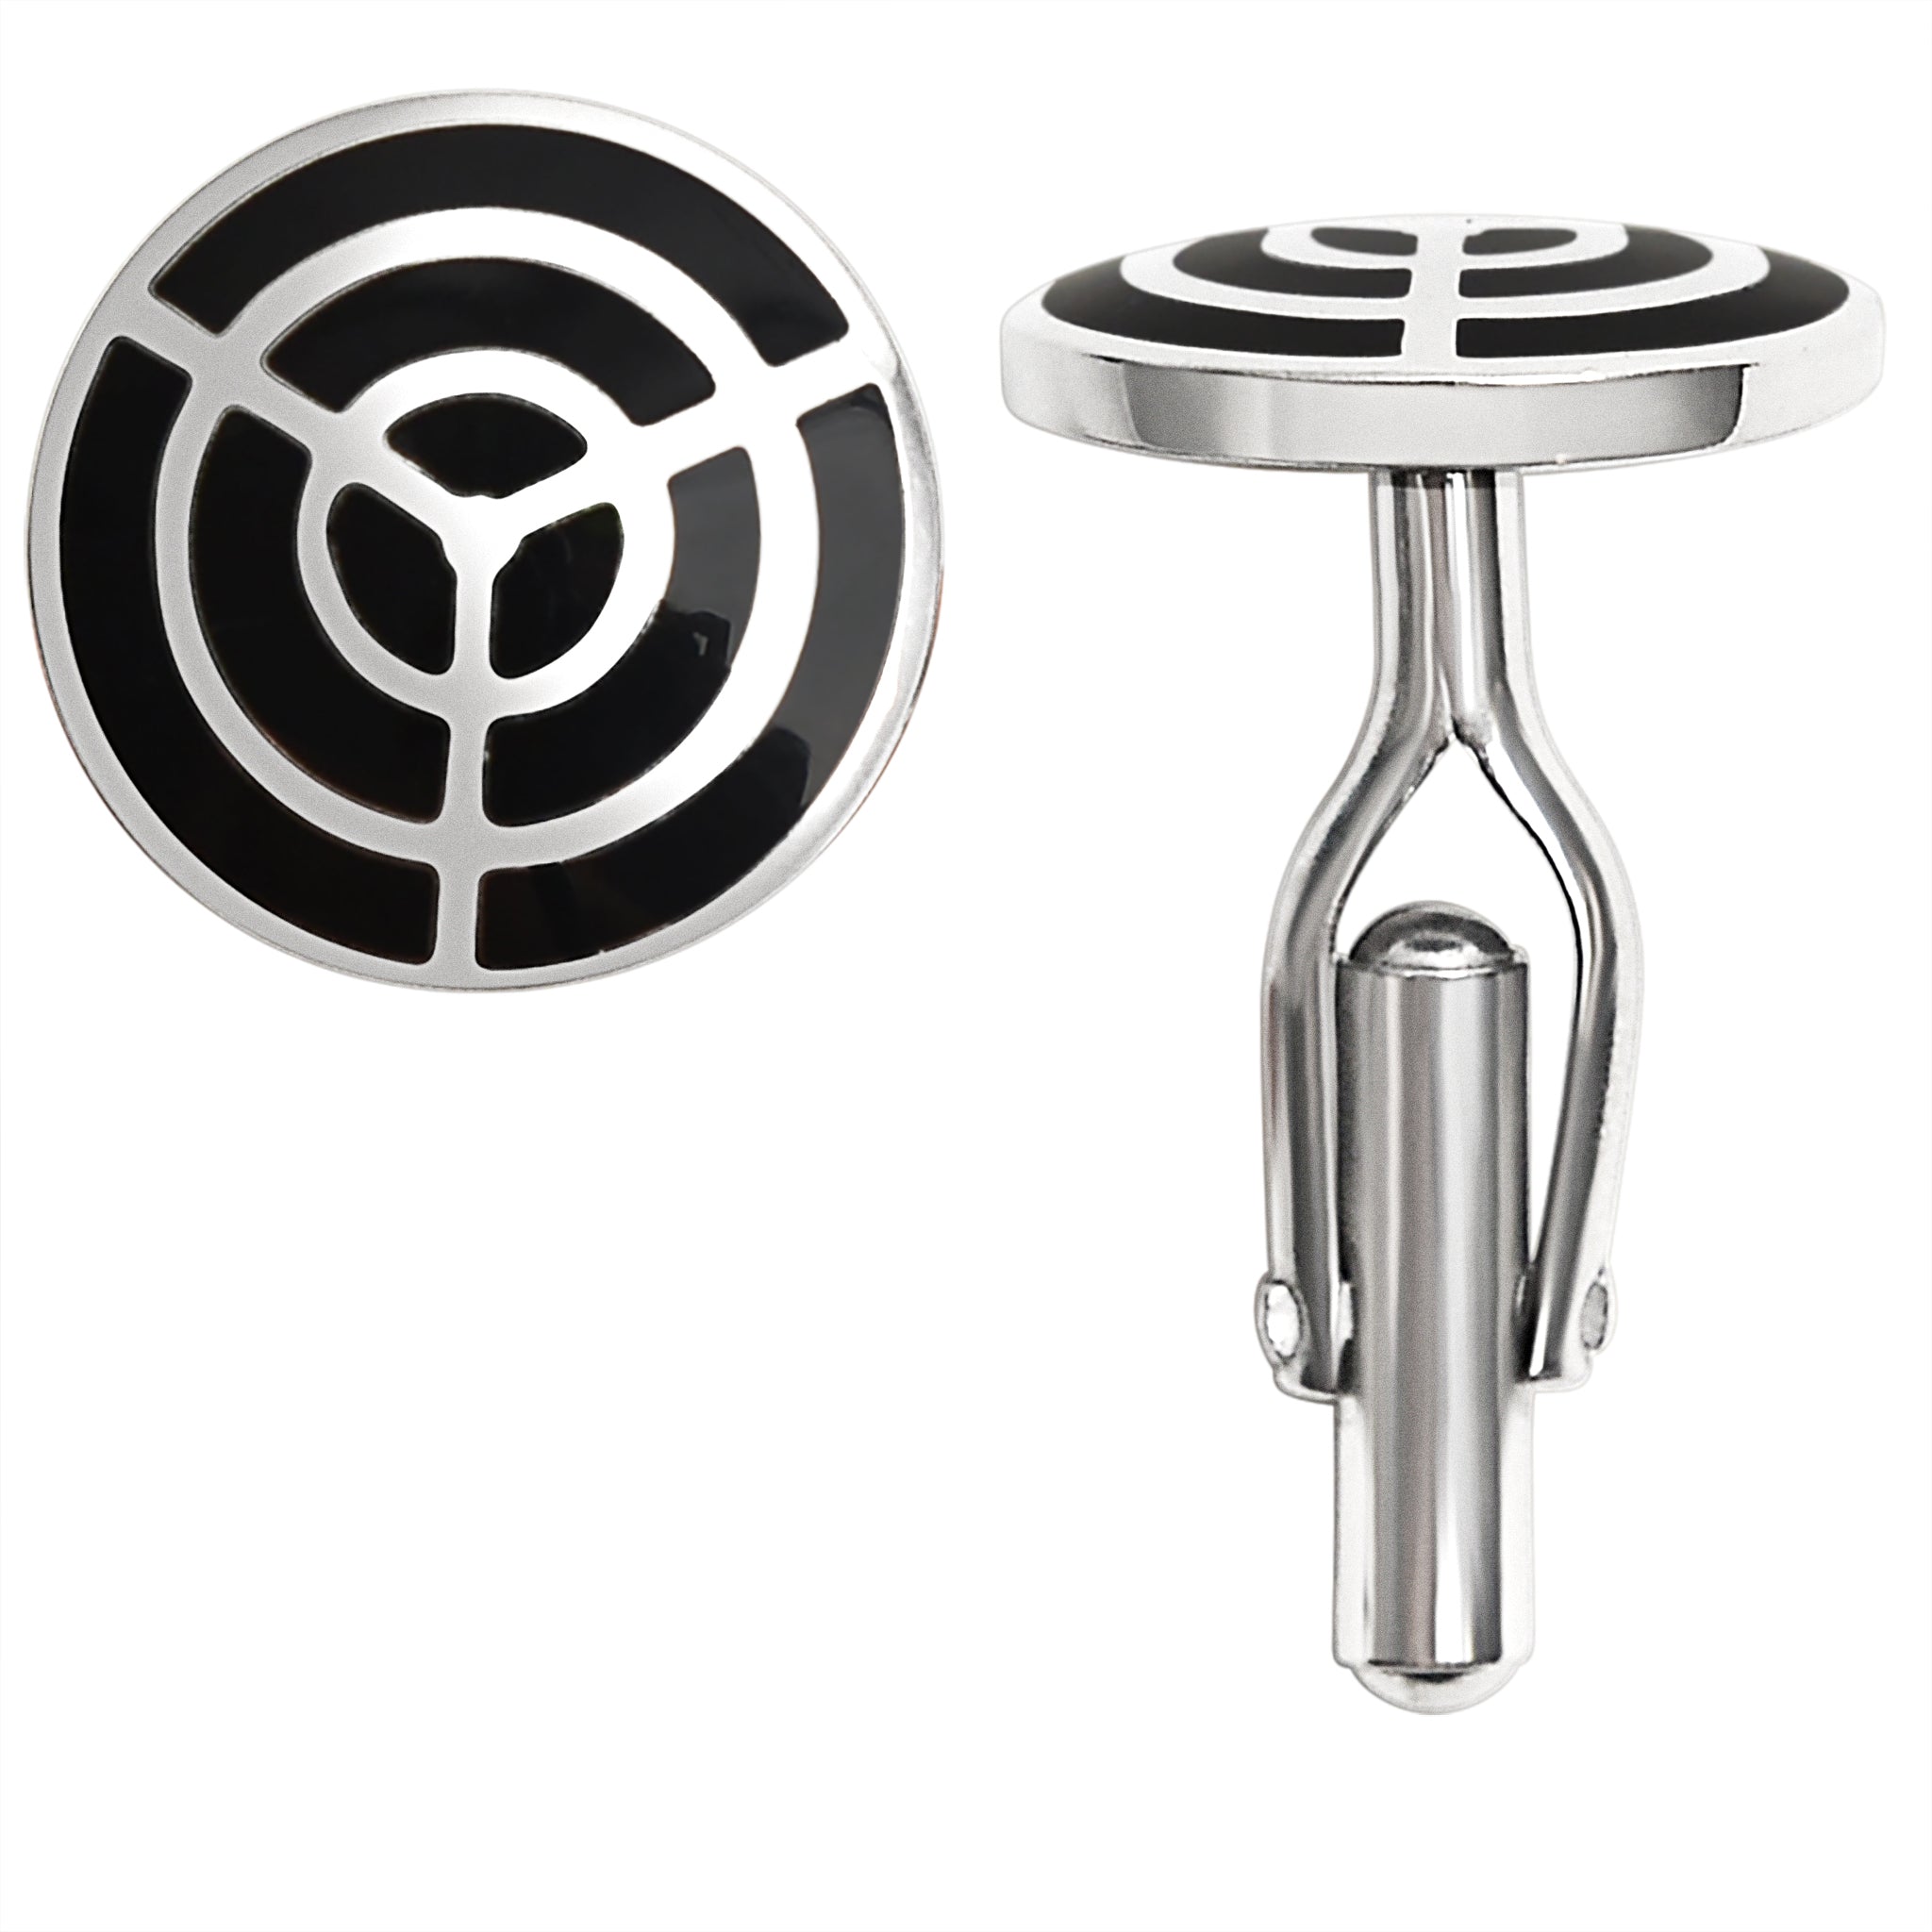 Stainless Steel and Black Crosshairs Cufflinks / NCZ0021-how to clean stainless steel jewelry- stainless steel jewelry wholesale- mens stainless steel jewelry- 316l stainless steel jewelry- stainless steel mens jewelry